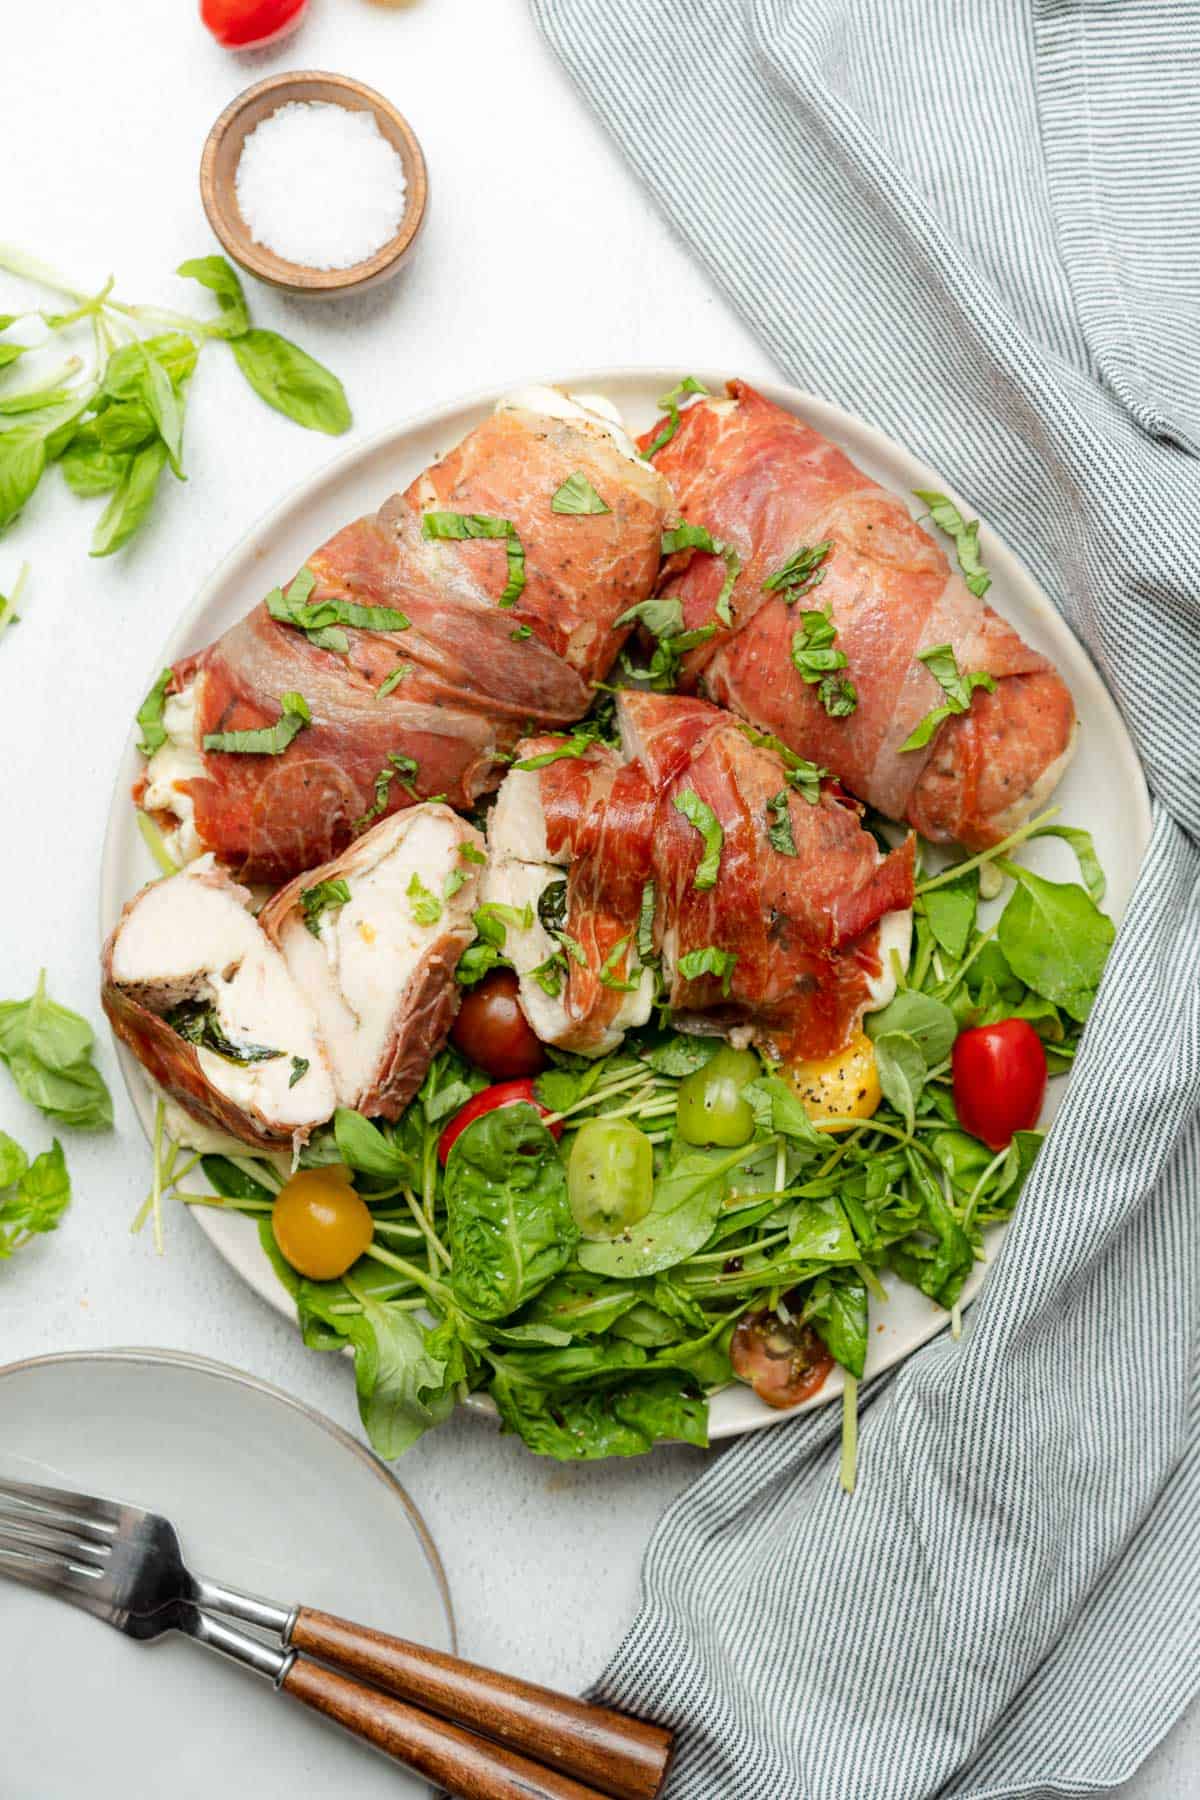 plate with bright arugula salad with tomatoes and chicken wrapped in parma ham with mozzarella cheese